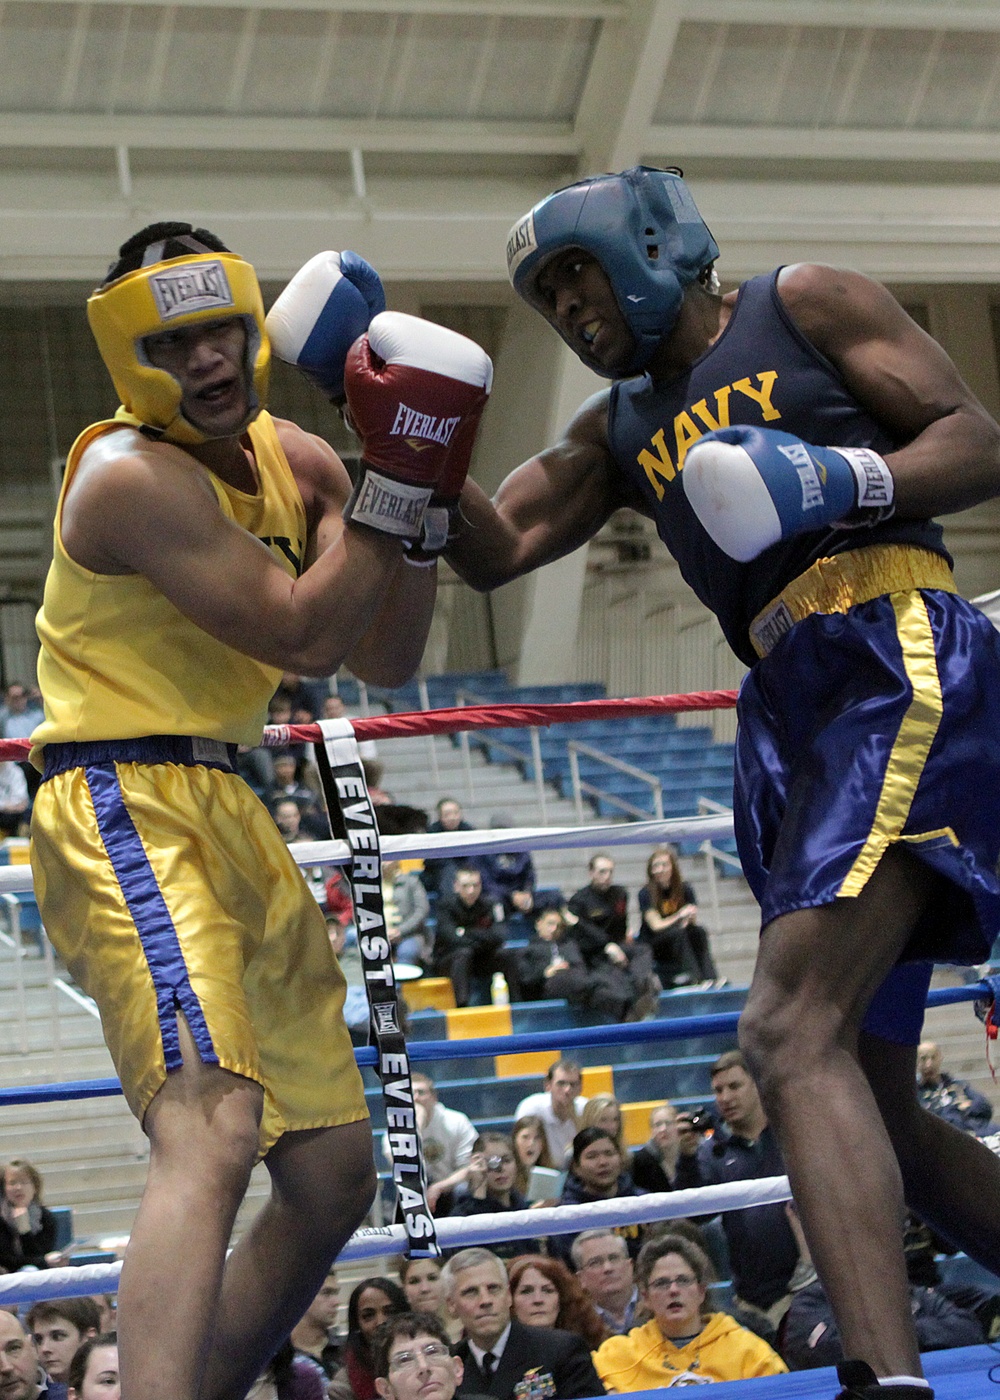 DVIDS Images U.S. Naval Academy Brigade Boxing Championships [Image